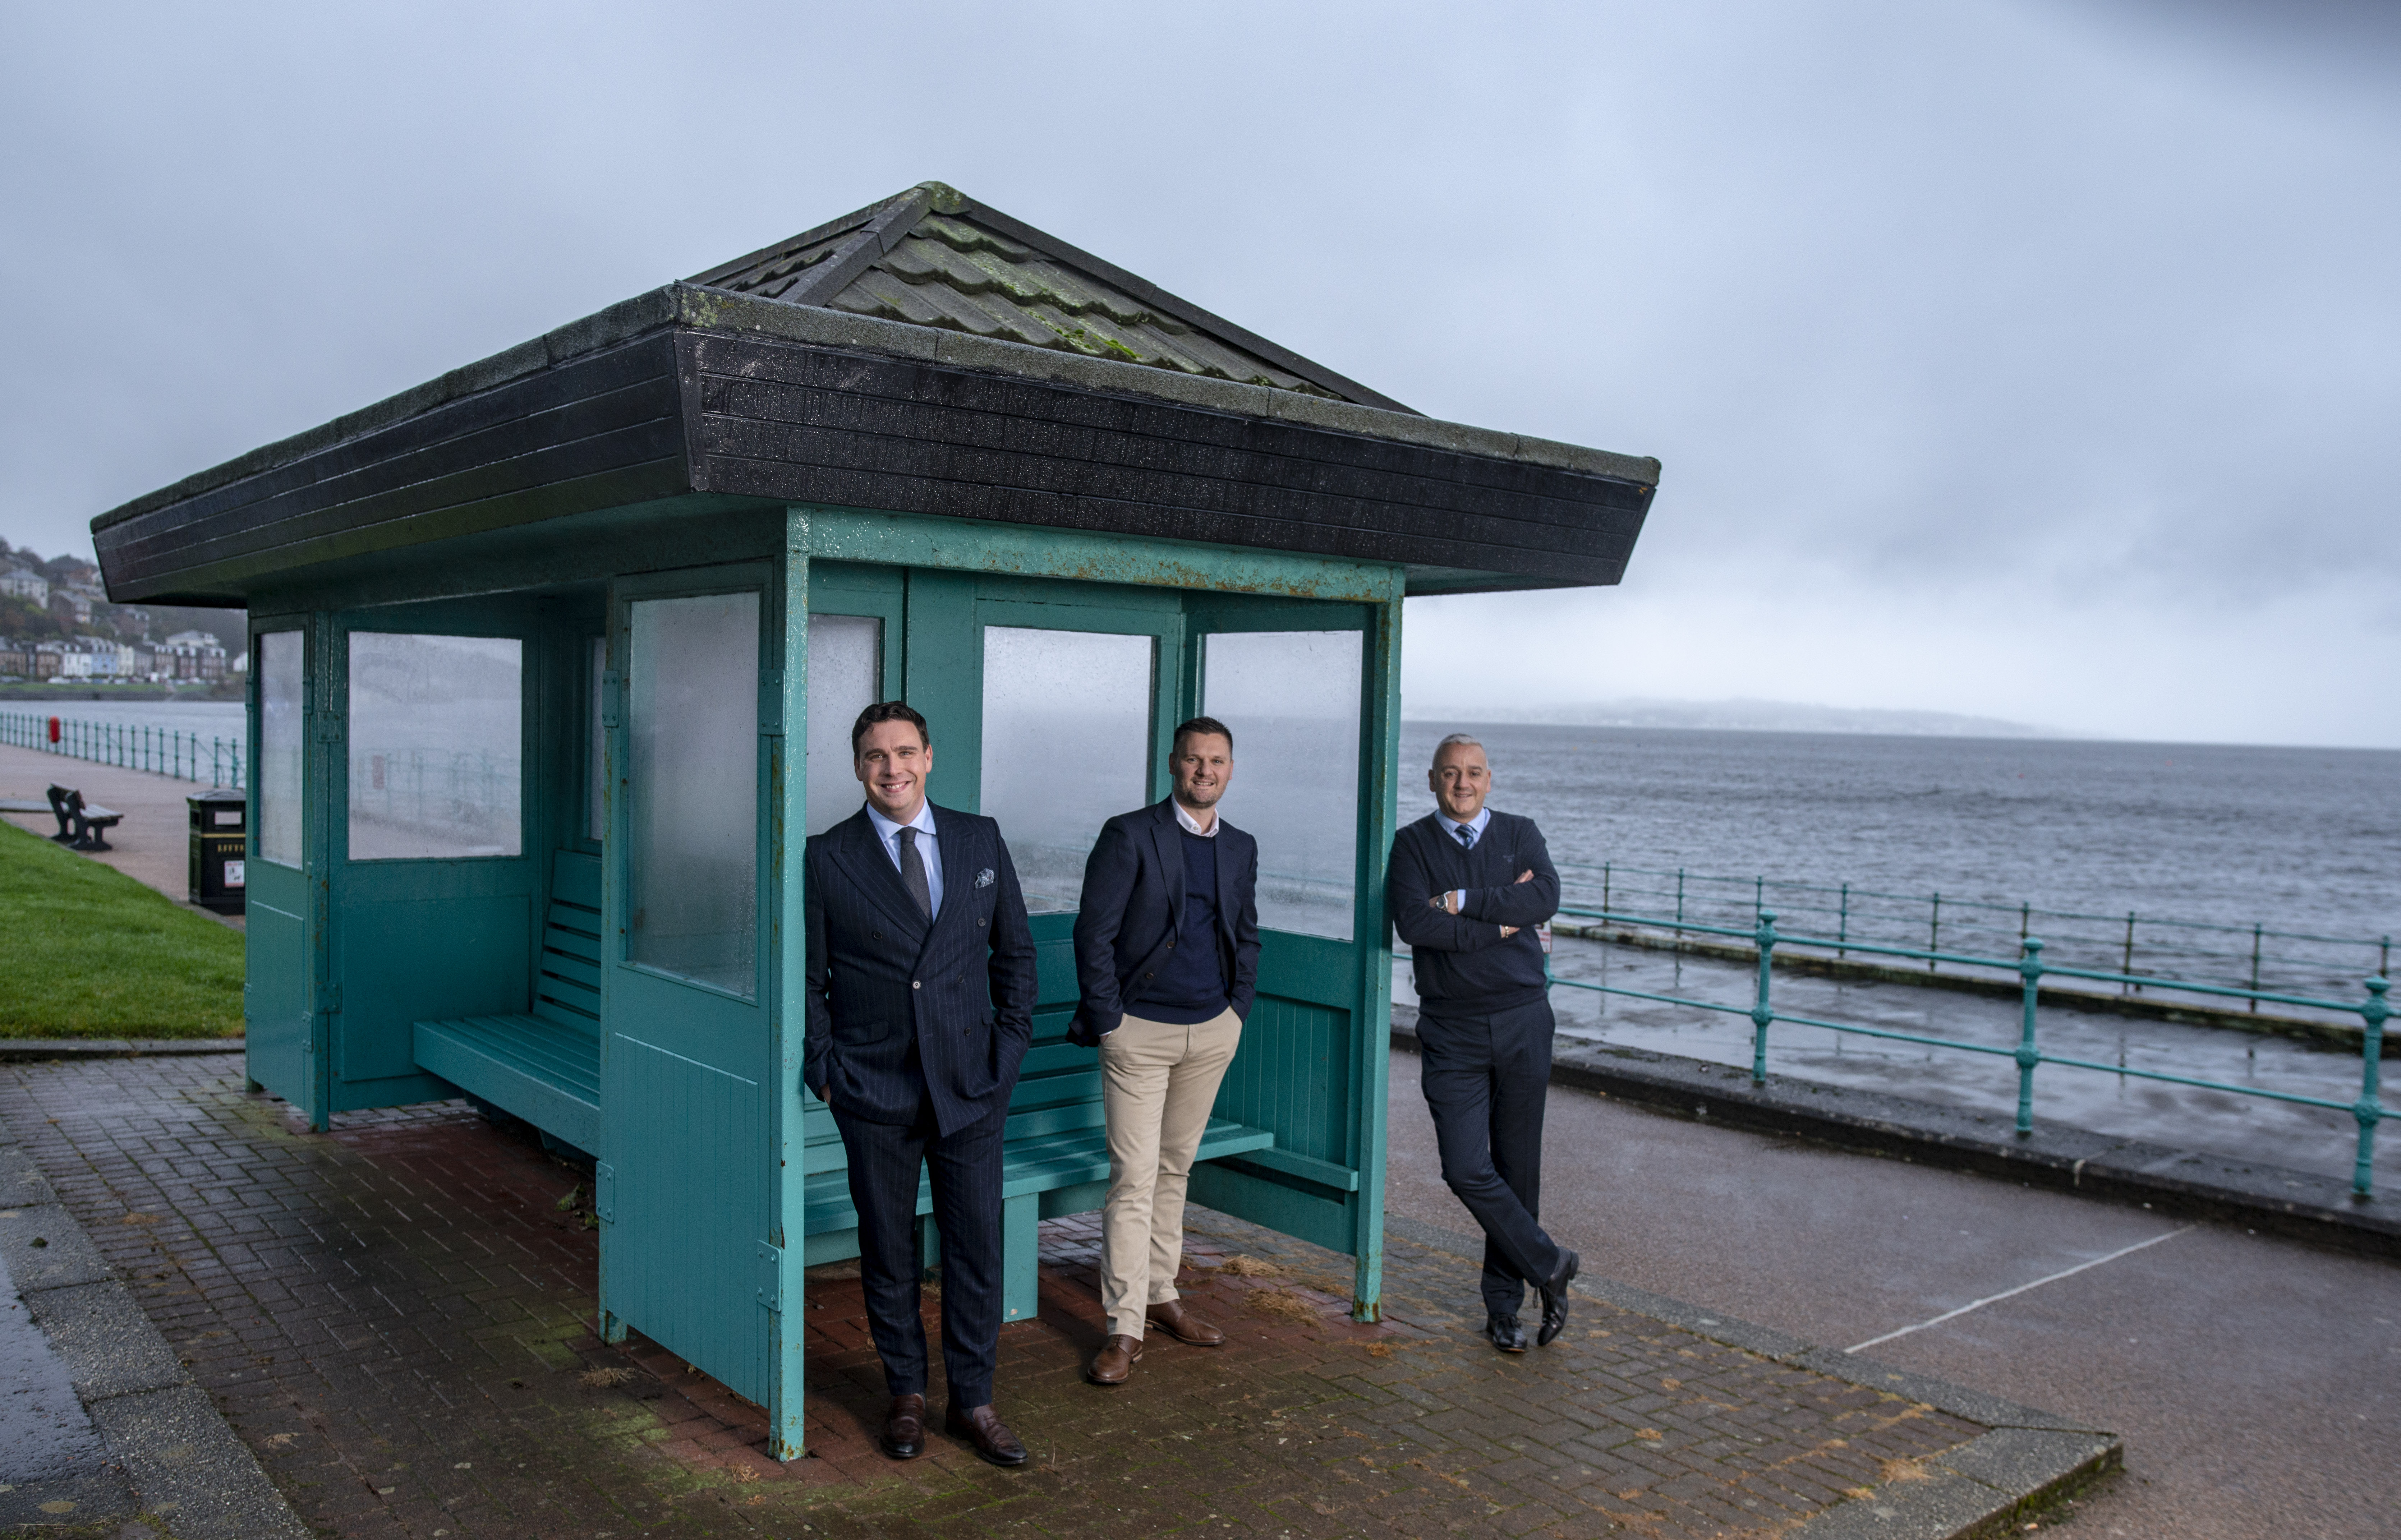 L-R: Riccardo Giovanacci, Andrew Bowman and Marco Rebecchi at Gourock promenade by renowned photographer, Alistair Devine.